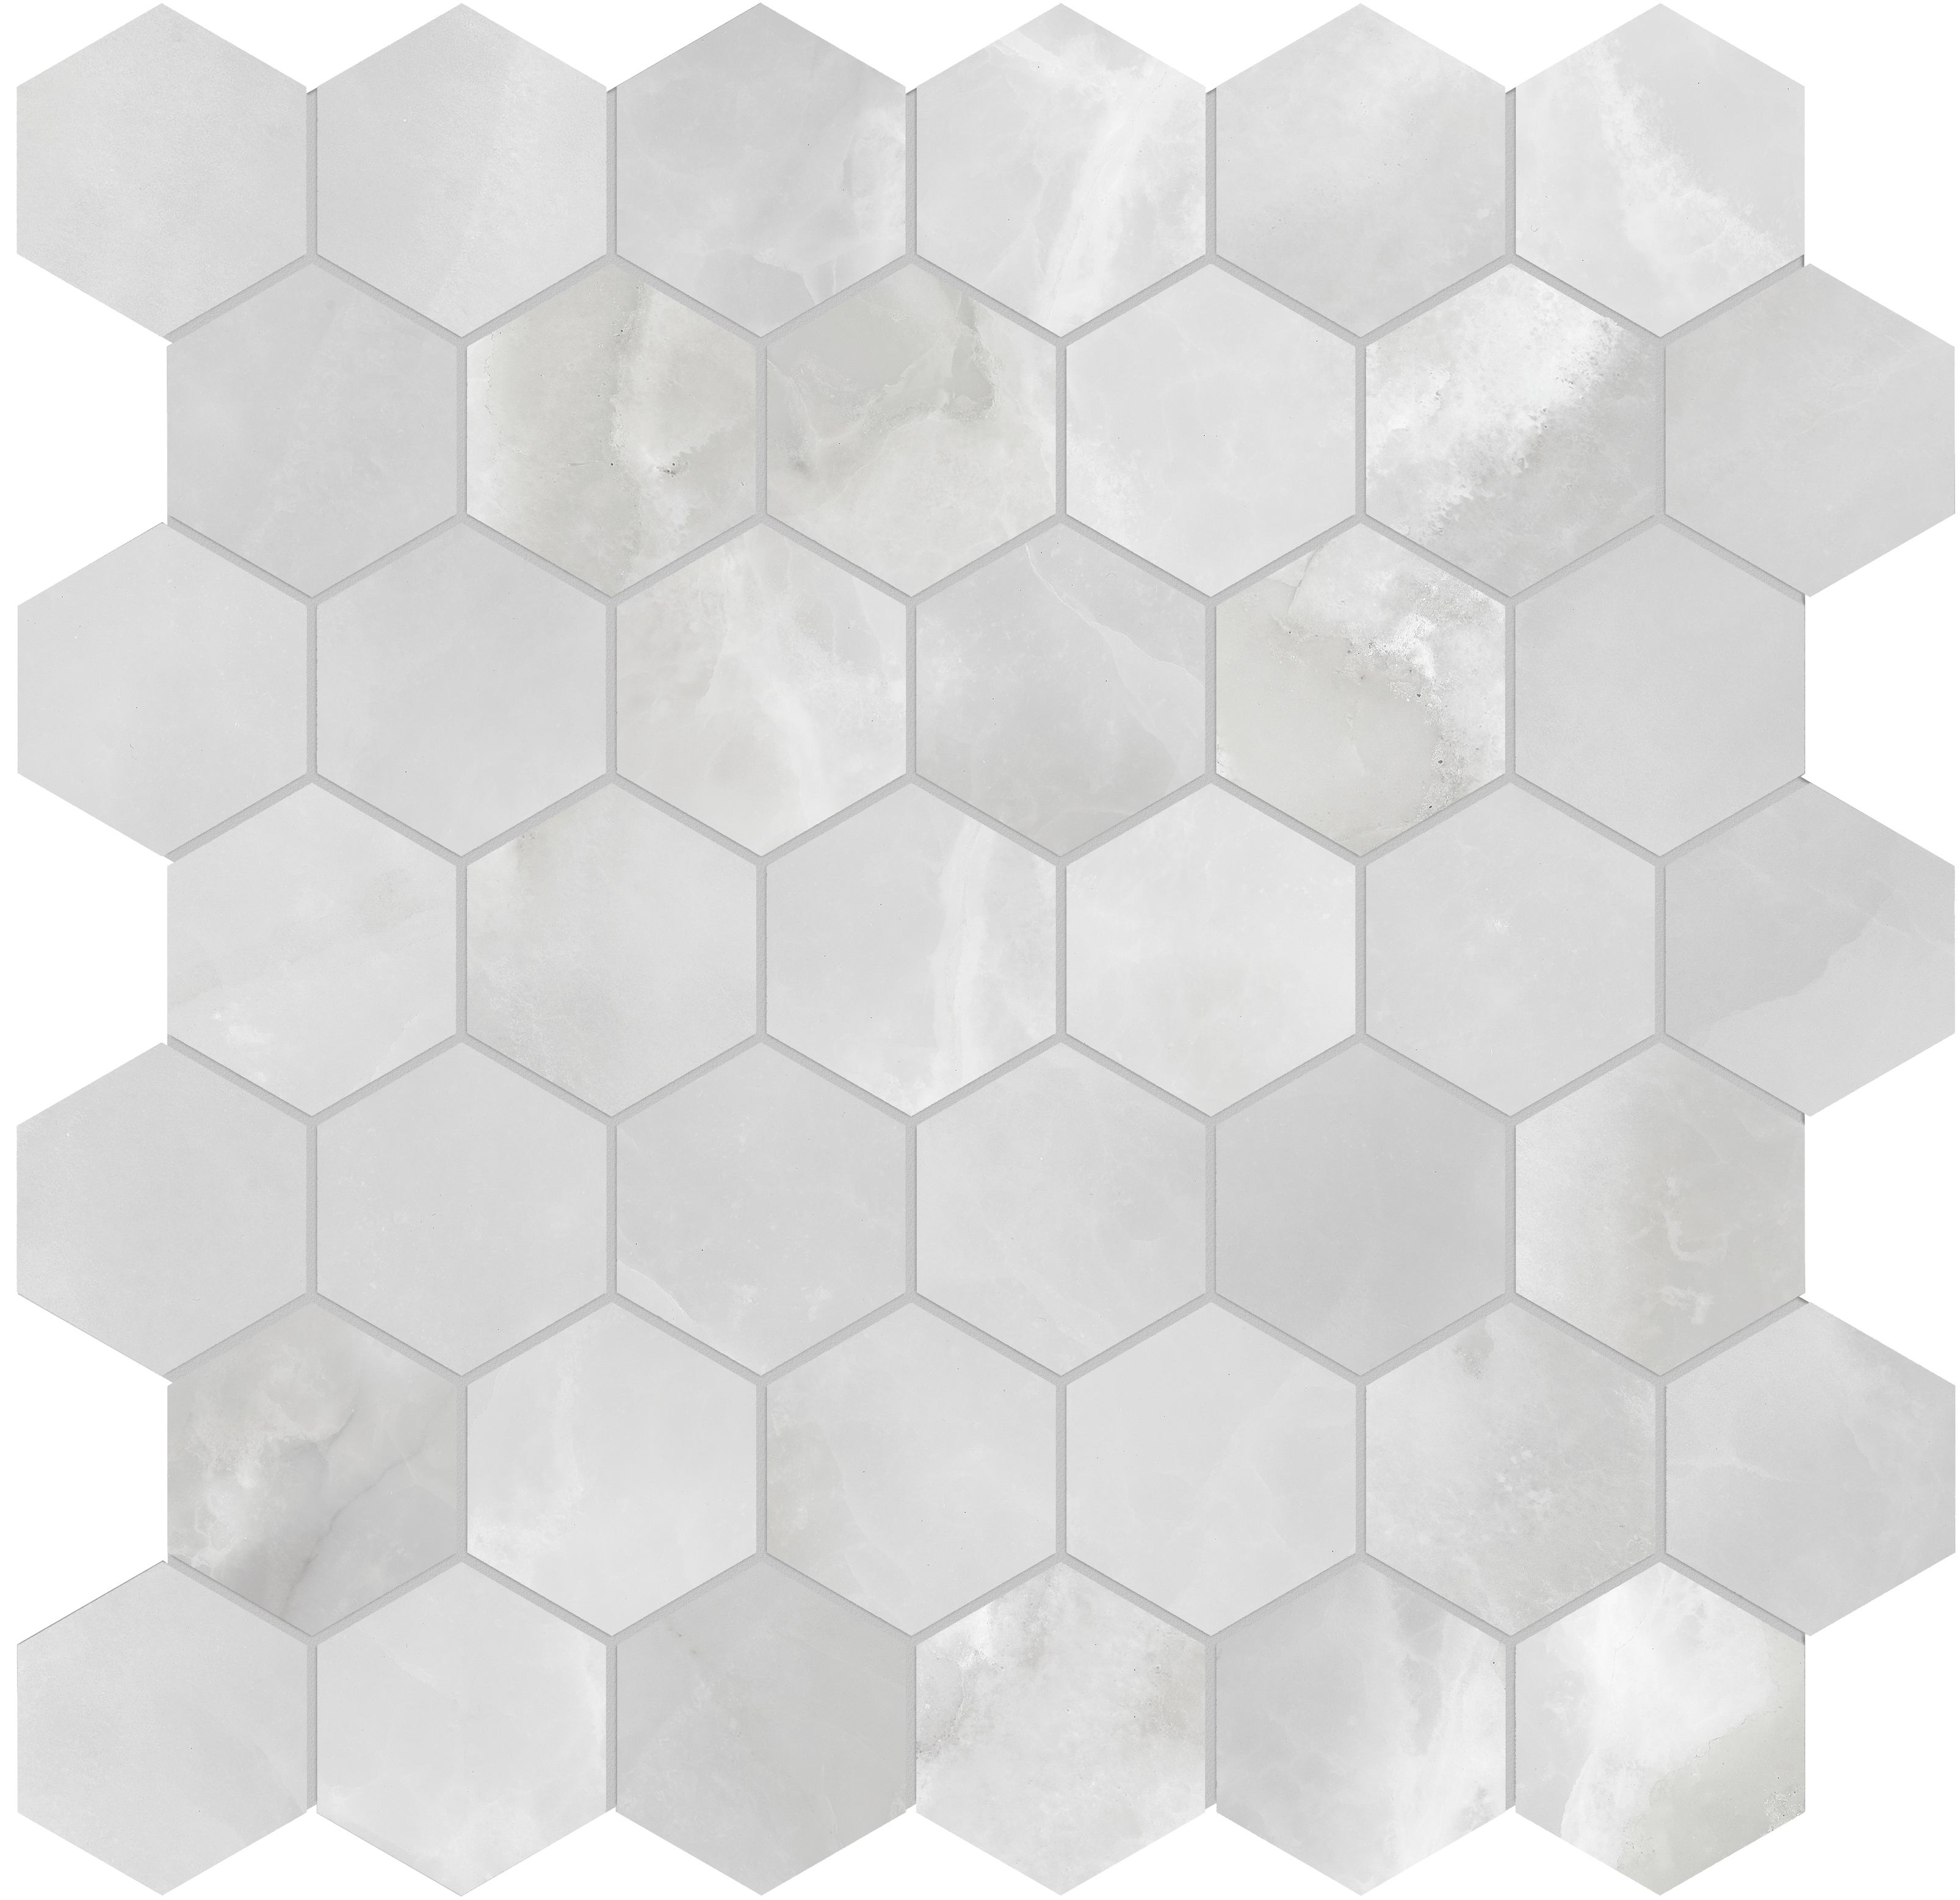 onyx crystallo hexagon 2-inch pattern glazed porcelain mosaic from plata anatolia collection distributed by surface group international matte finish rectified edge mesh shape